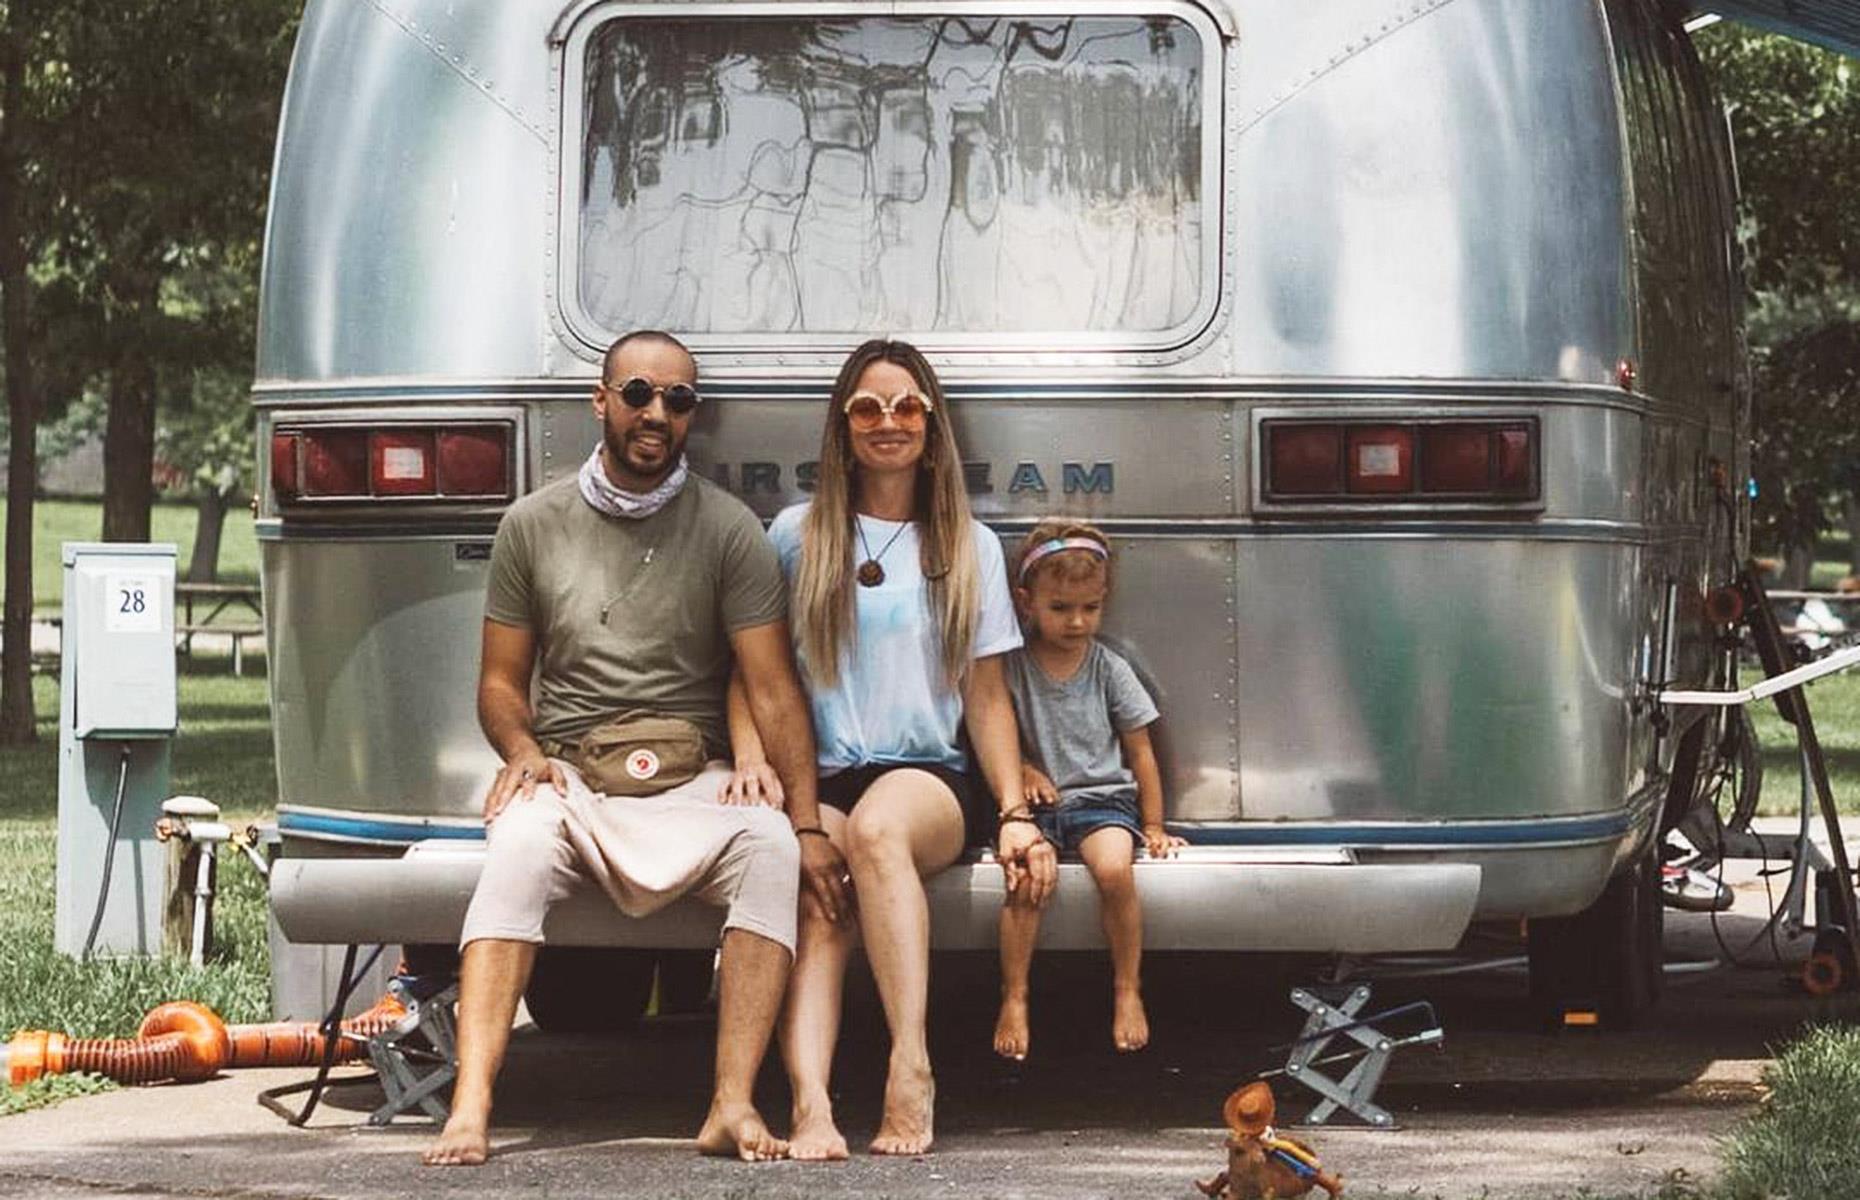 <p>An <a href="https://www.loveproperty.com/gallerylist/84986/this-couple-gave-their-tiny-home-an-extreme-makeover">adventurous couple</a> purchased this 1976 Airstream Sovereign for just $10,000 and spent a full year lovingly renovating it, creating their own dream home on wheels. At only 200 feet in length and chock full of dated 70s furniture and bulky plastic cabinetry, the couple had to get creative with their renovations to make the space work for them.</p>